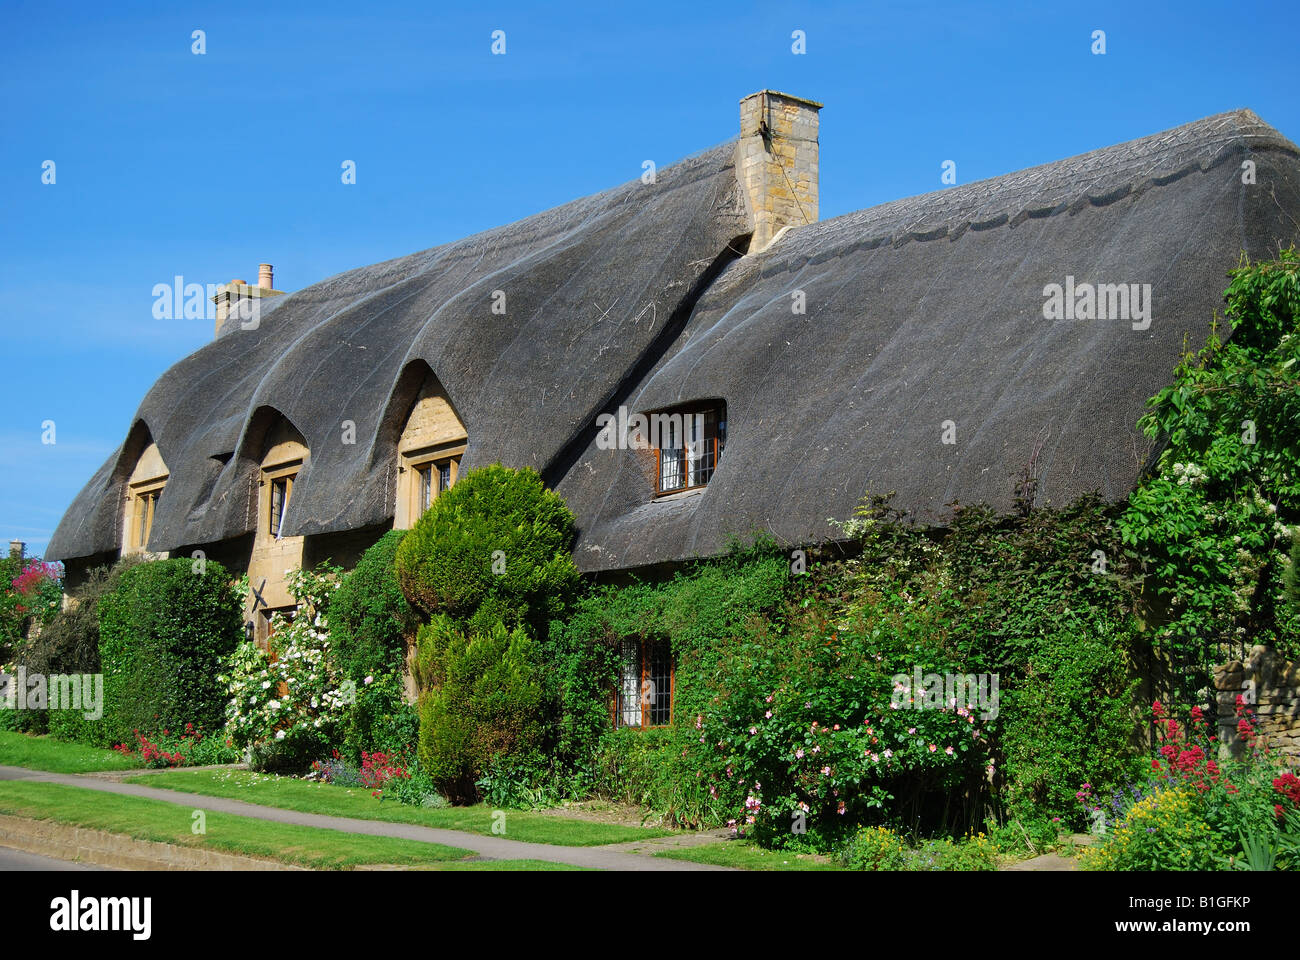 Thatched Cotswold cottage, Chipping Campden, Cotswolds, Gloucestershire, England, United Kingdom Stock Photo